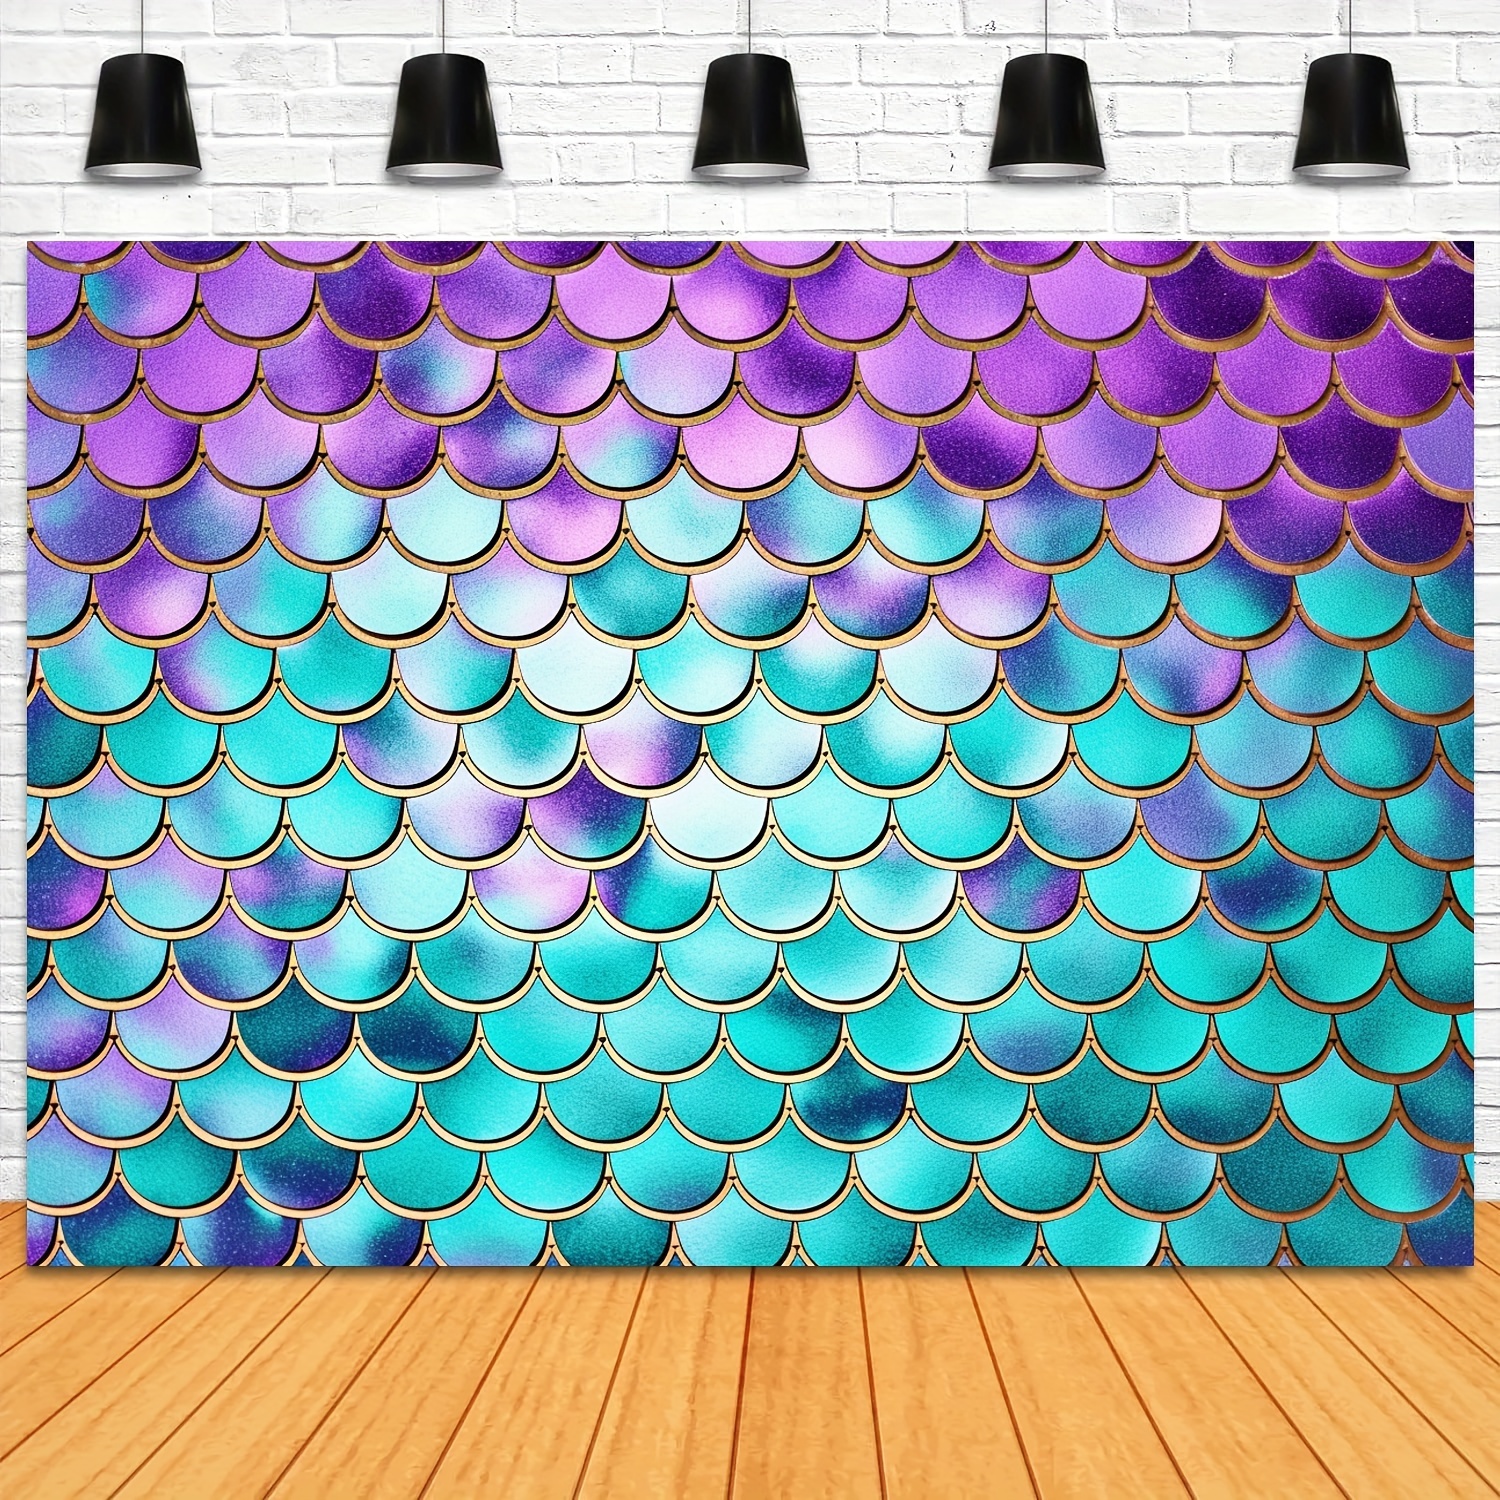 Generic The Sea Little Mermaid Backdrop Purple Pink Mermaid Scales Teal  Shell Ocean Party Background Girls Birthday Decorations Multicolor